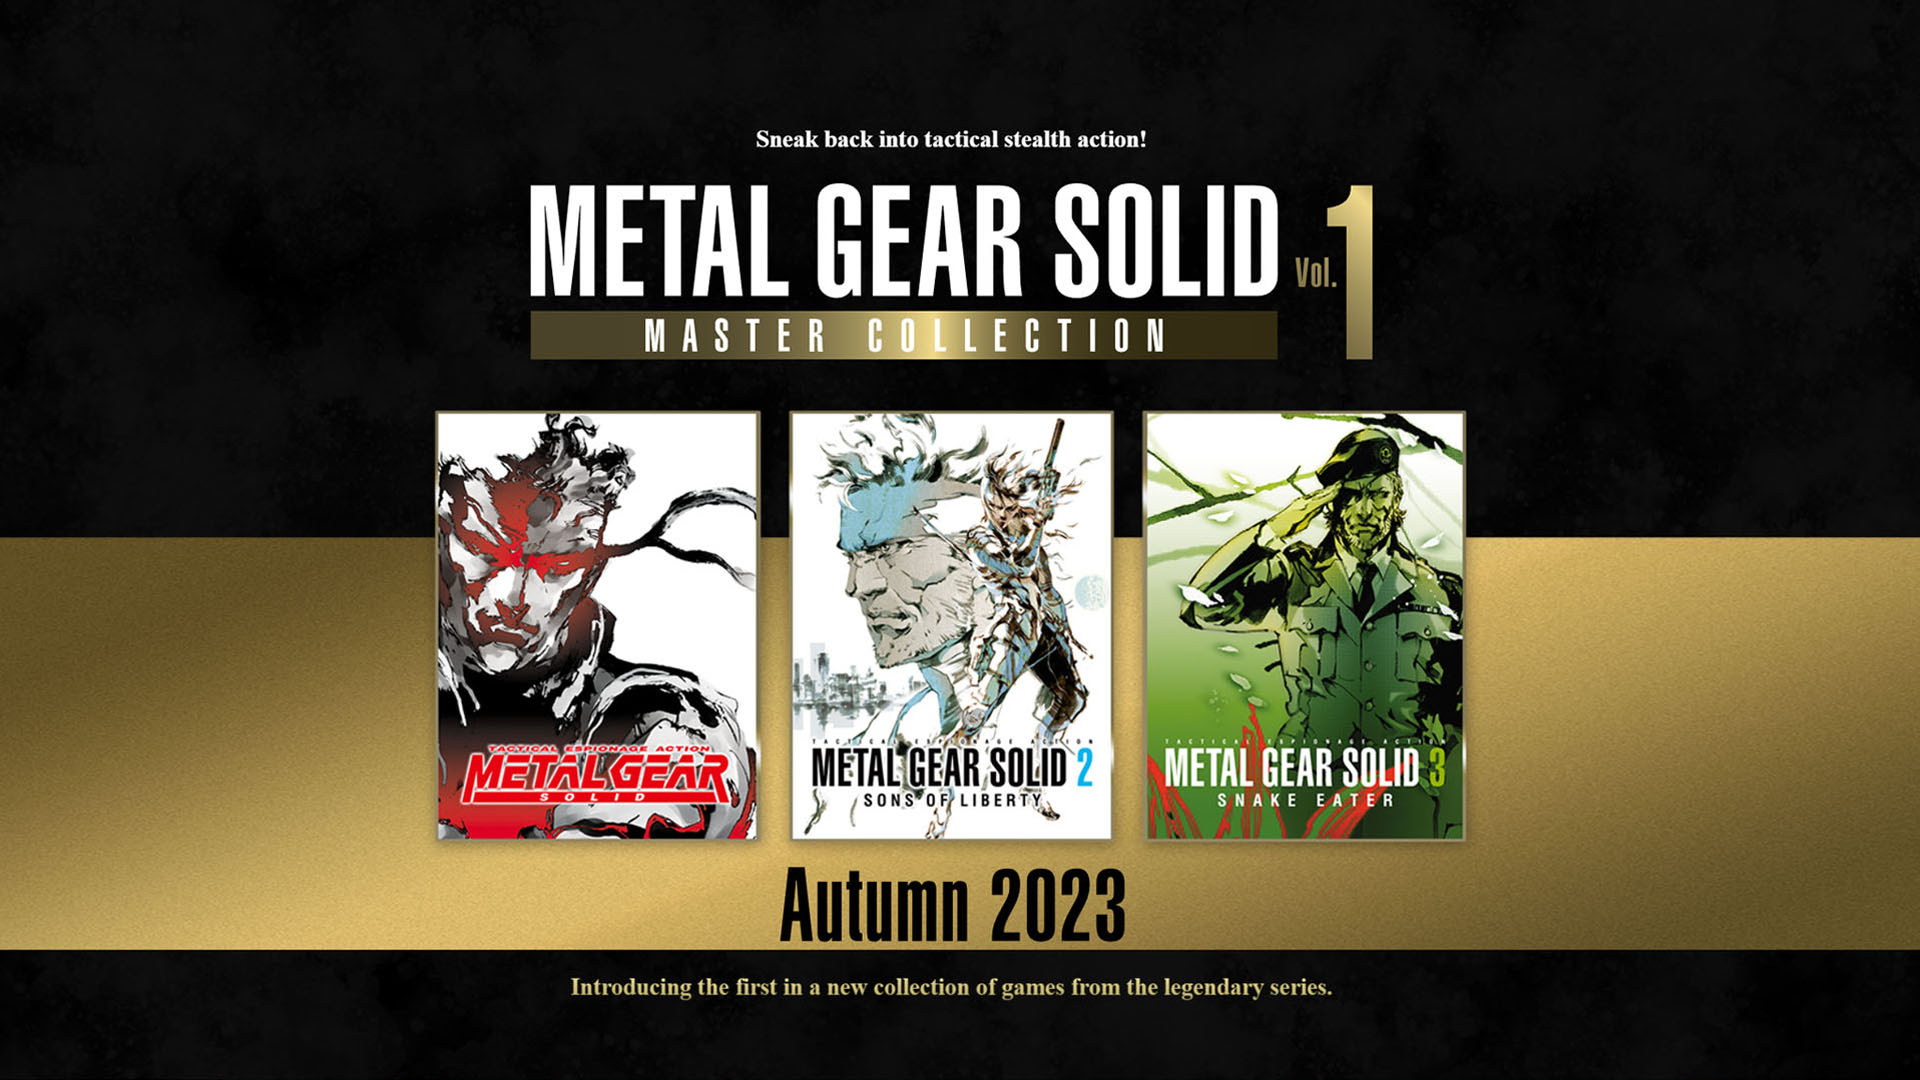 Metal Gear Solid: Master Collection Vol. 1 announced